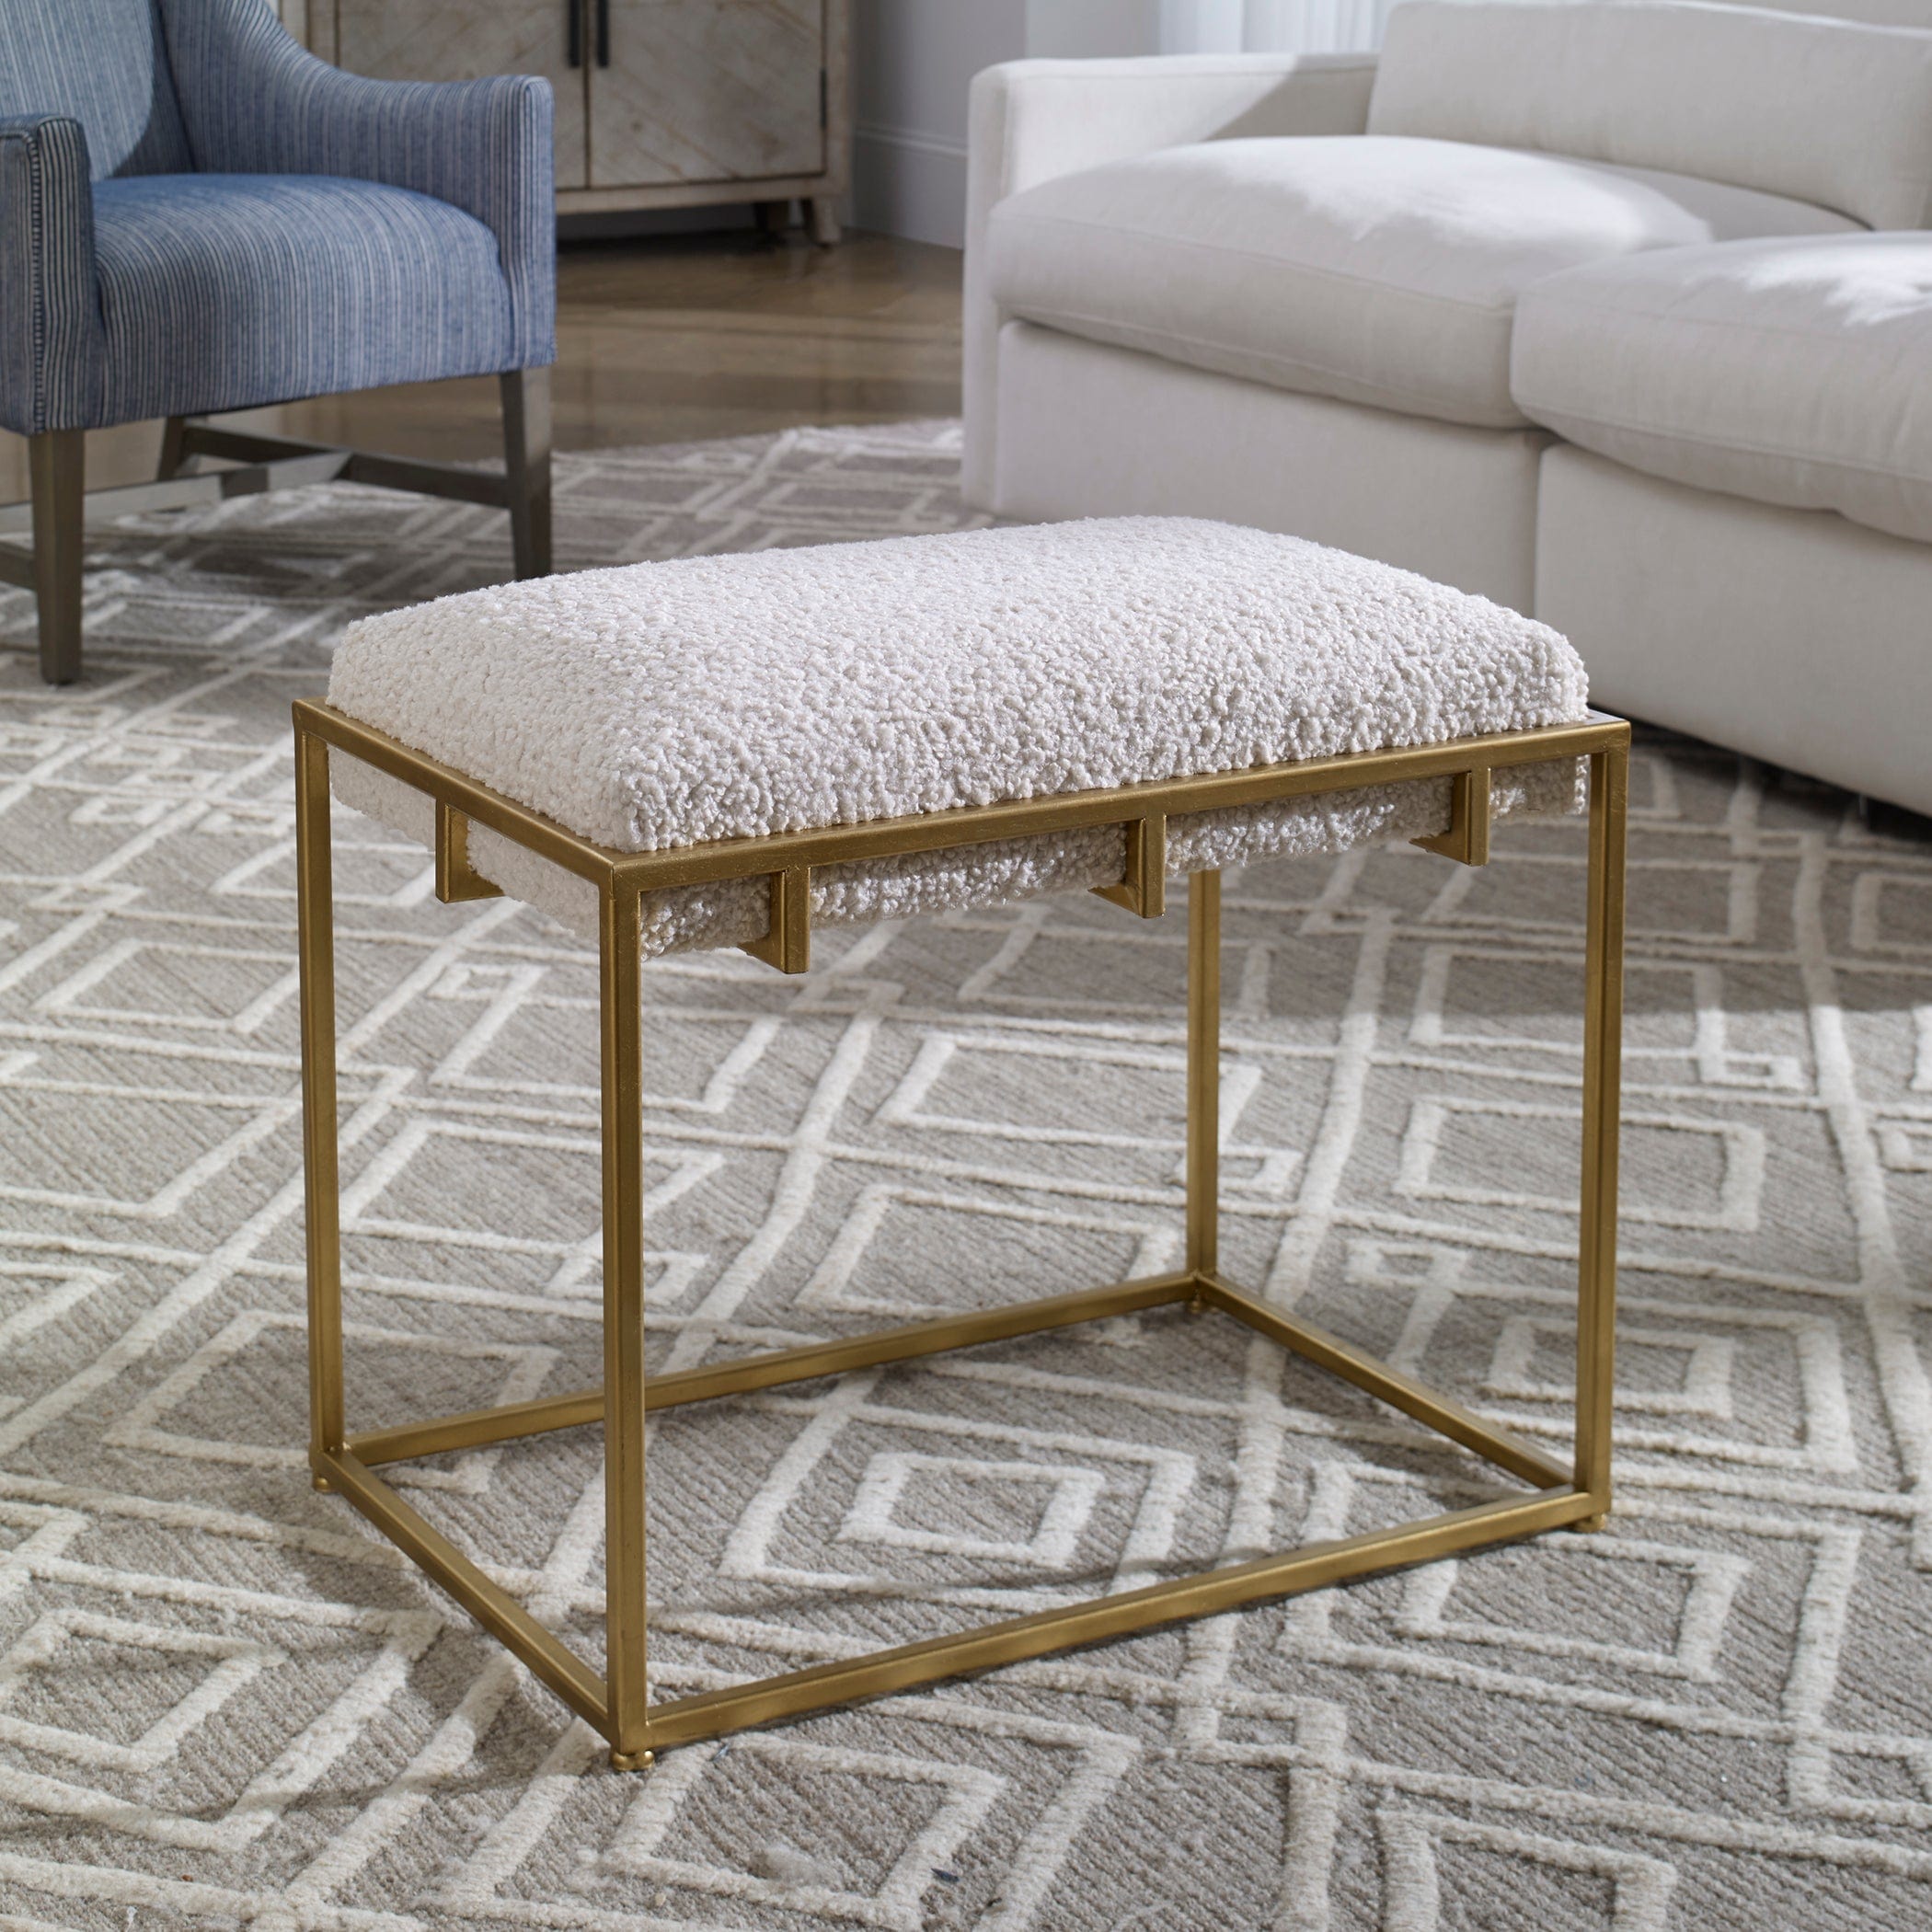 Paradox Small Gold & White Shearling Bench Uttermost